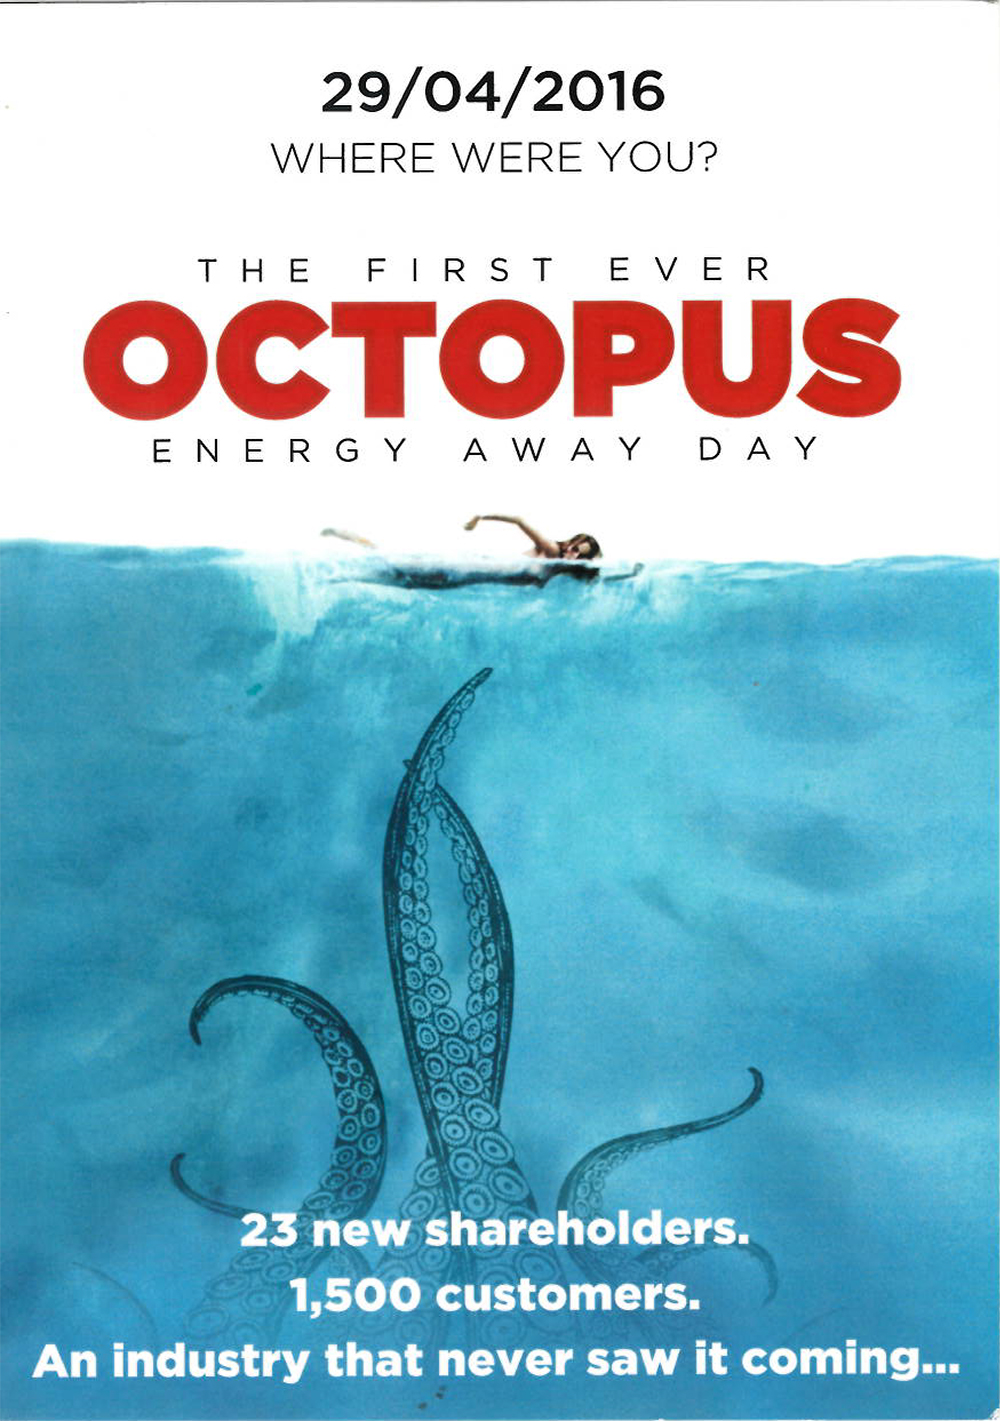 The flyer for Octopus Energy's first ever away day. It reads "23 new shareholders, 1,500 customers, an industry that never saw it coming..."